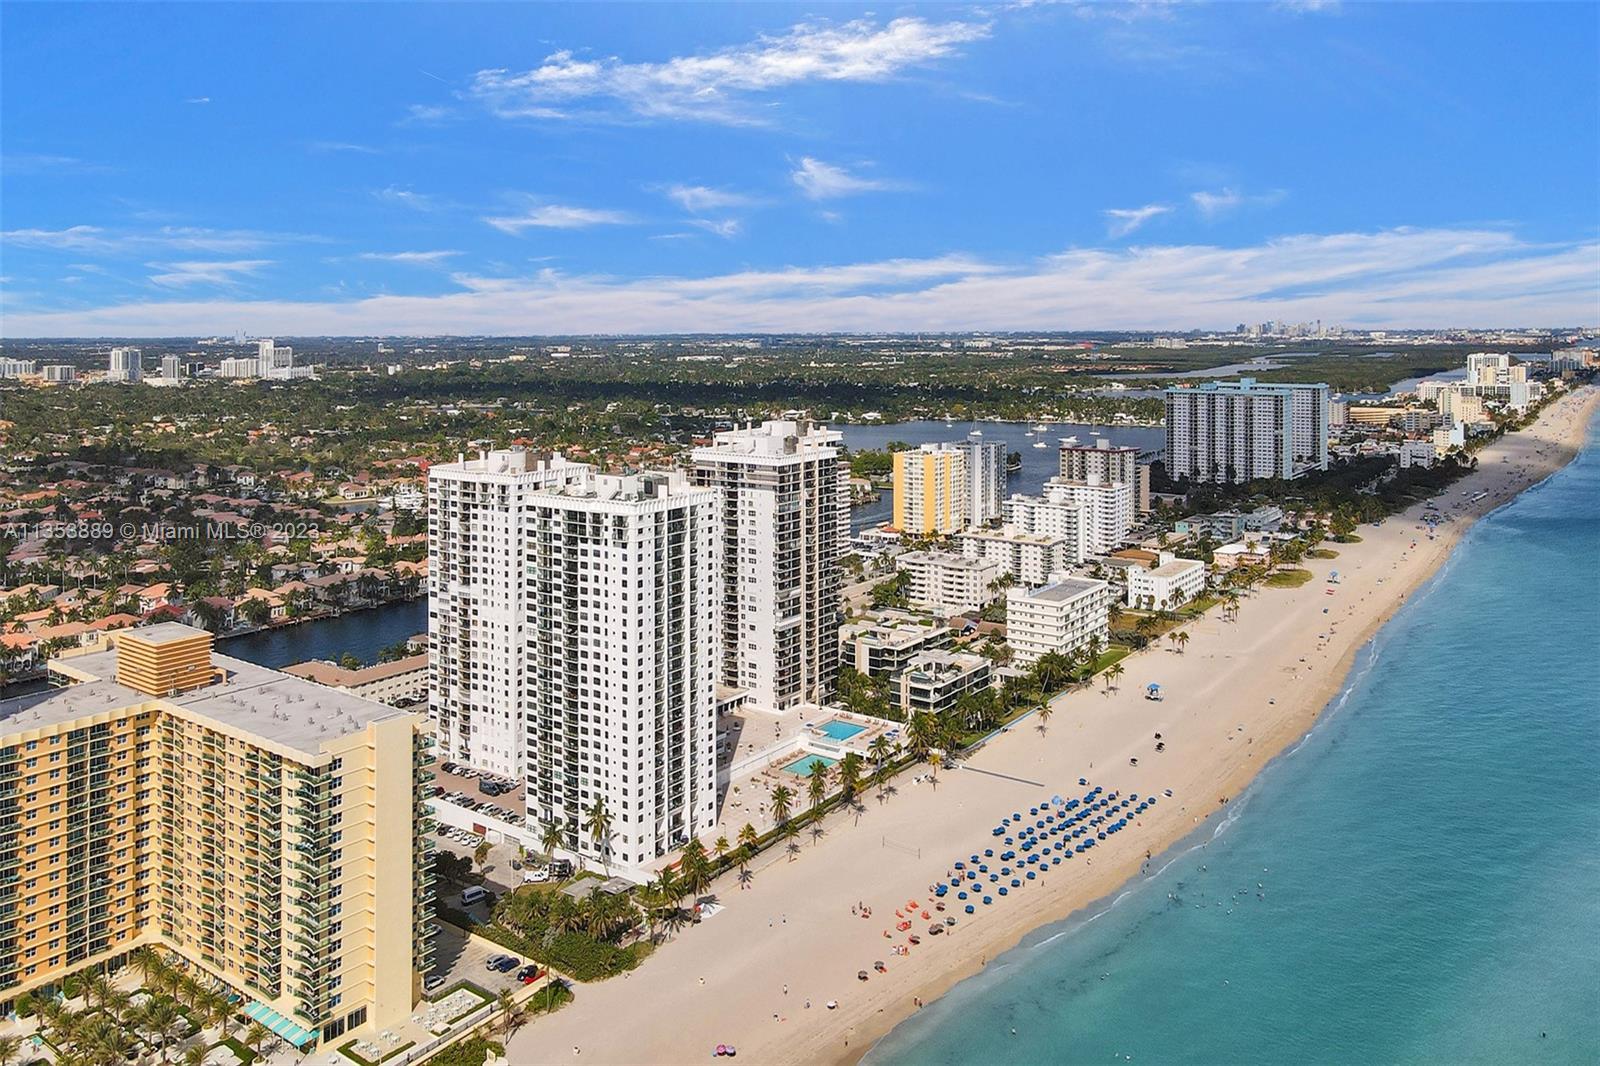 Enjoy breathtaken Intracoastal and Skyline views from your Large terace on 14th floor! Spacious 1,00